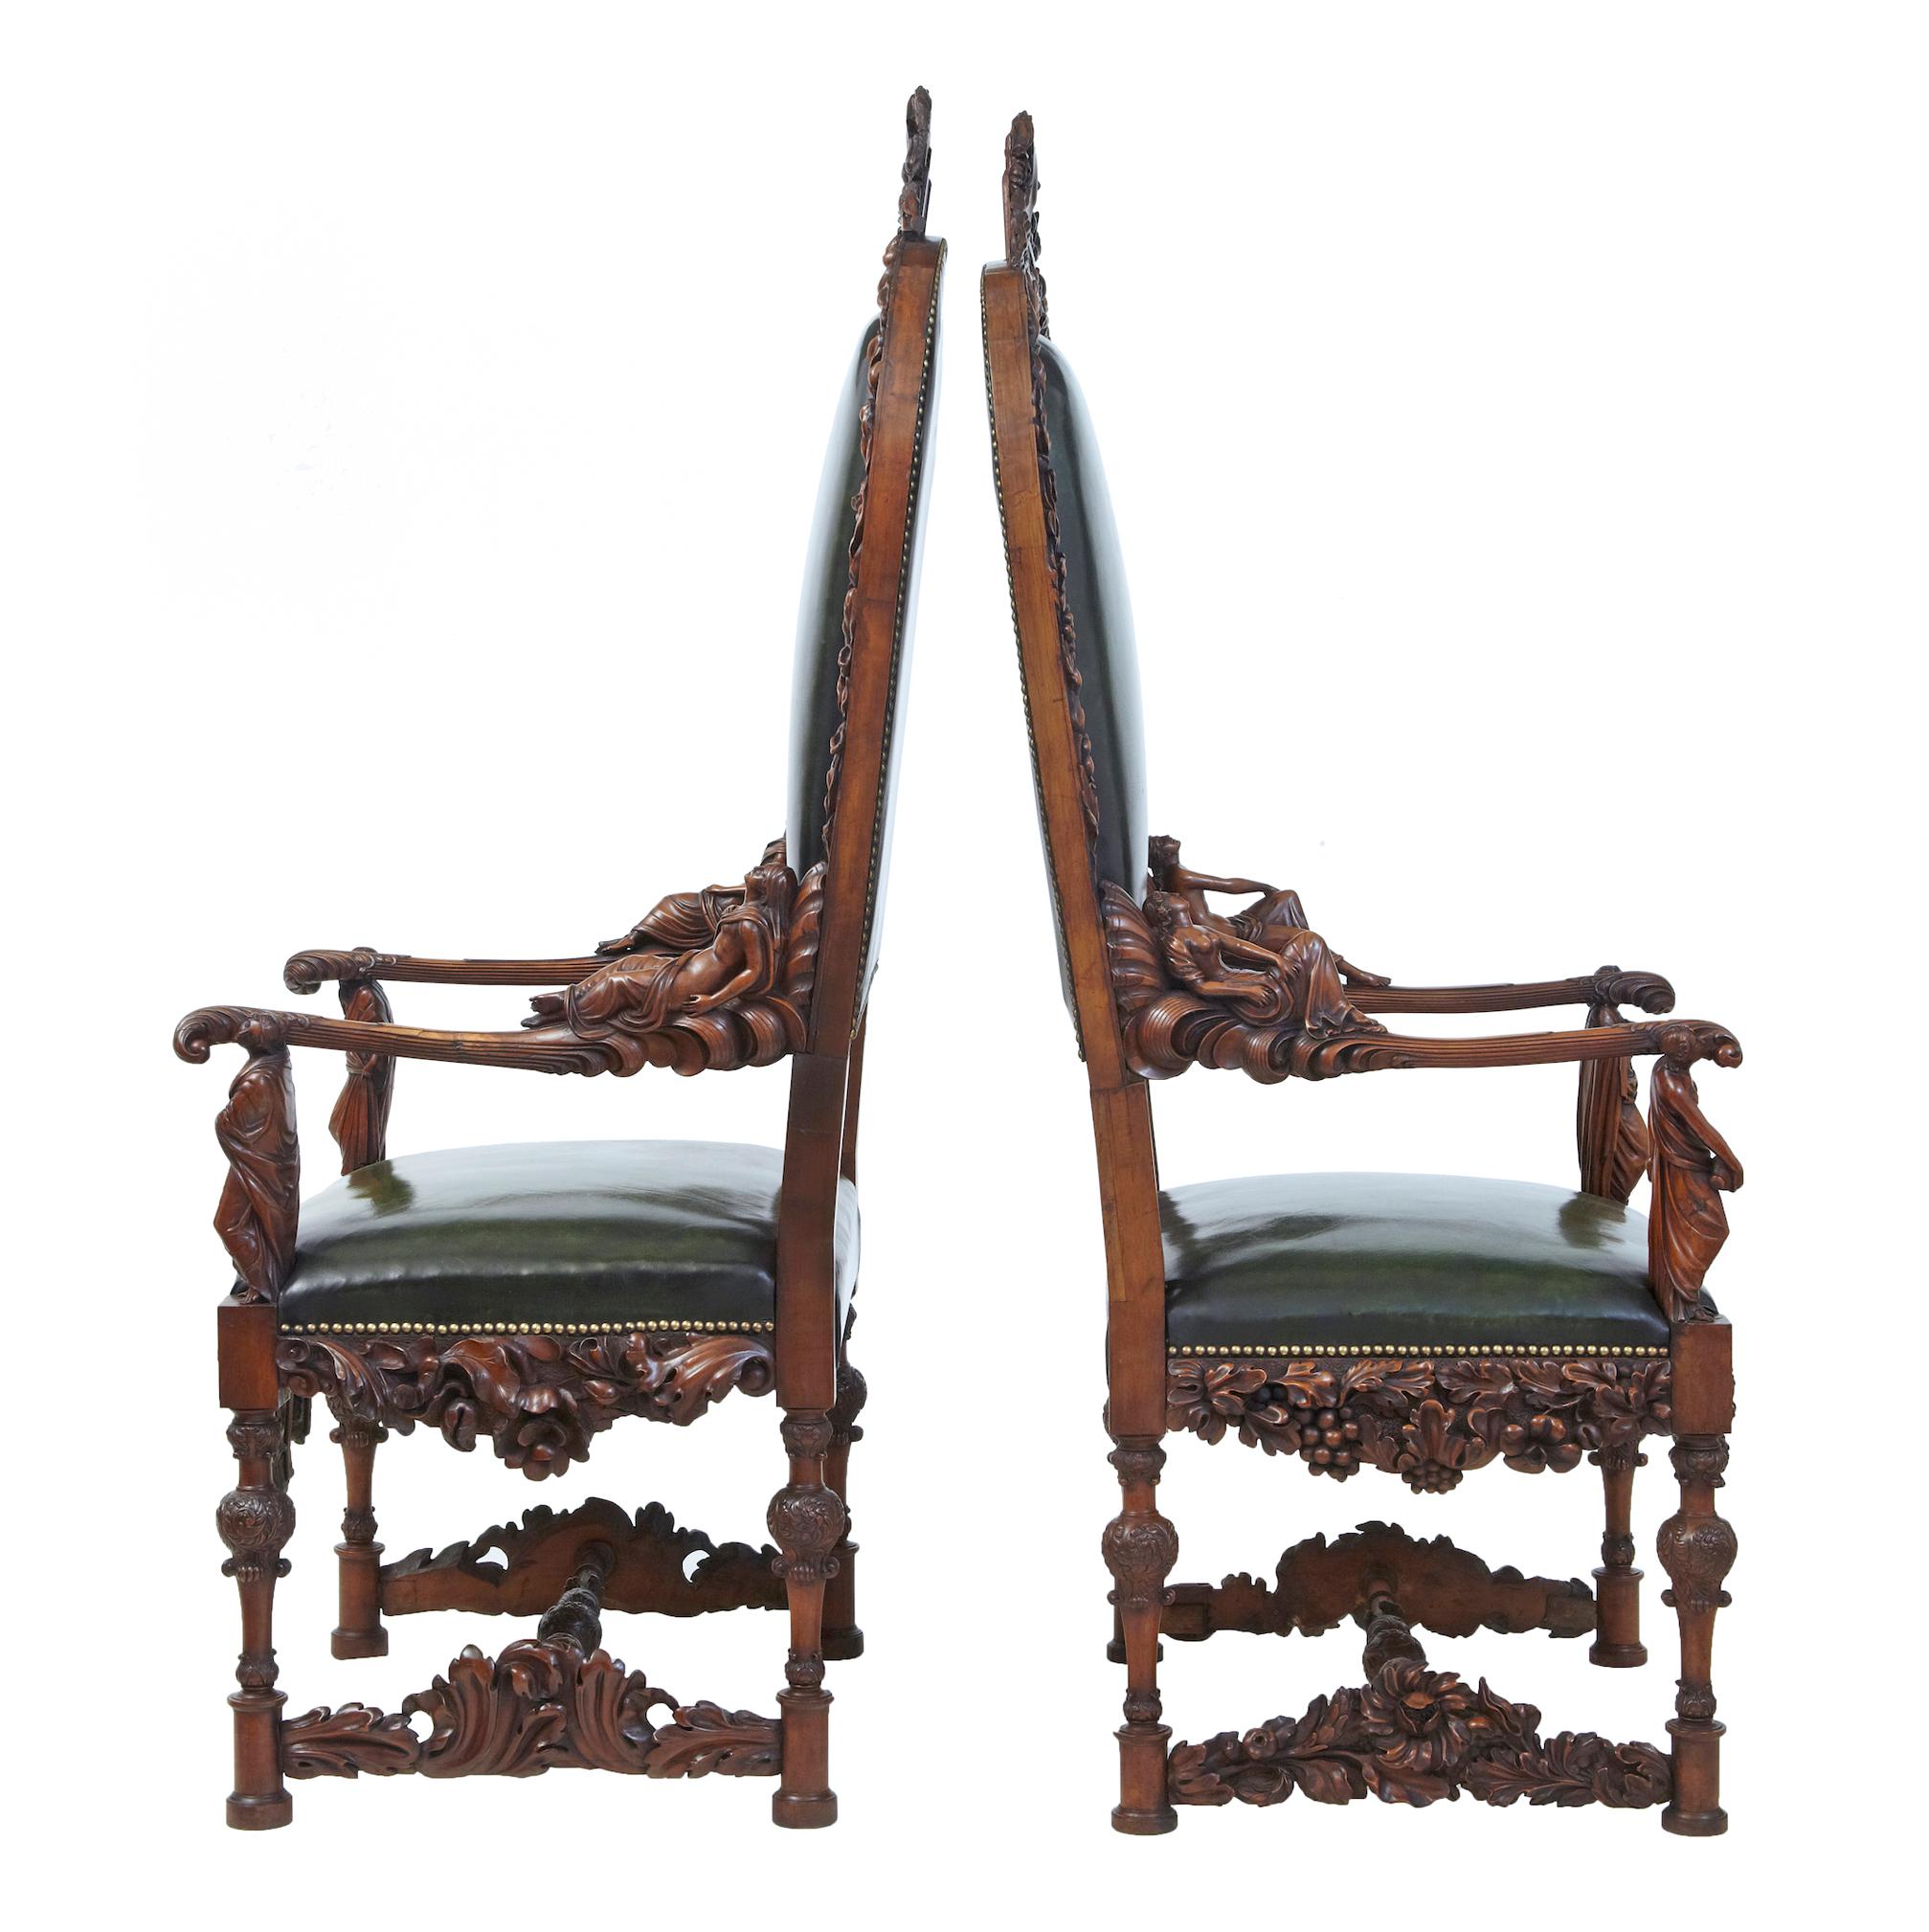 Pair of 19th century carved walnut Florentine Renaissance armchairs, circa 1860.
Profusely carved walnut carved in the Renaissance Revival style. Depicting eight classical carved figures, four of which are reclining nudes.
Fluted shaped arms are